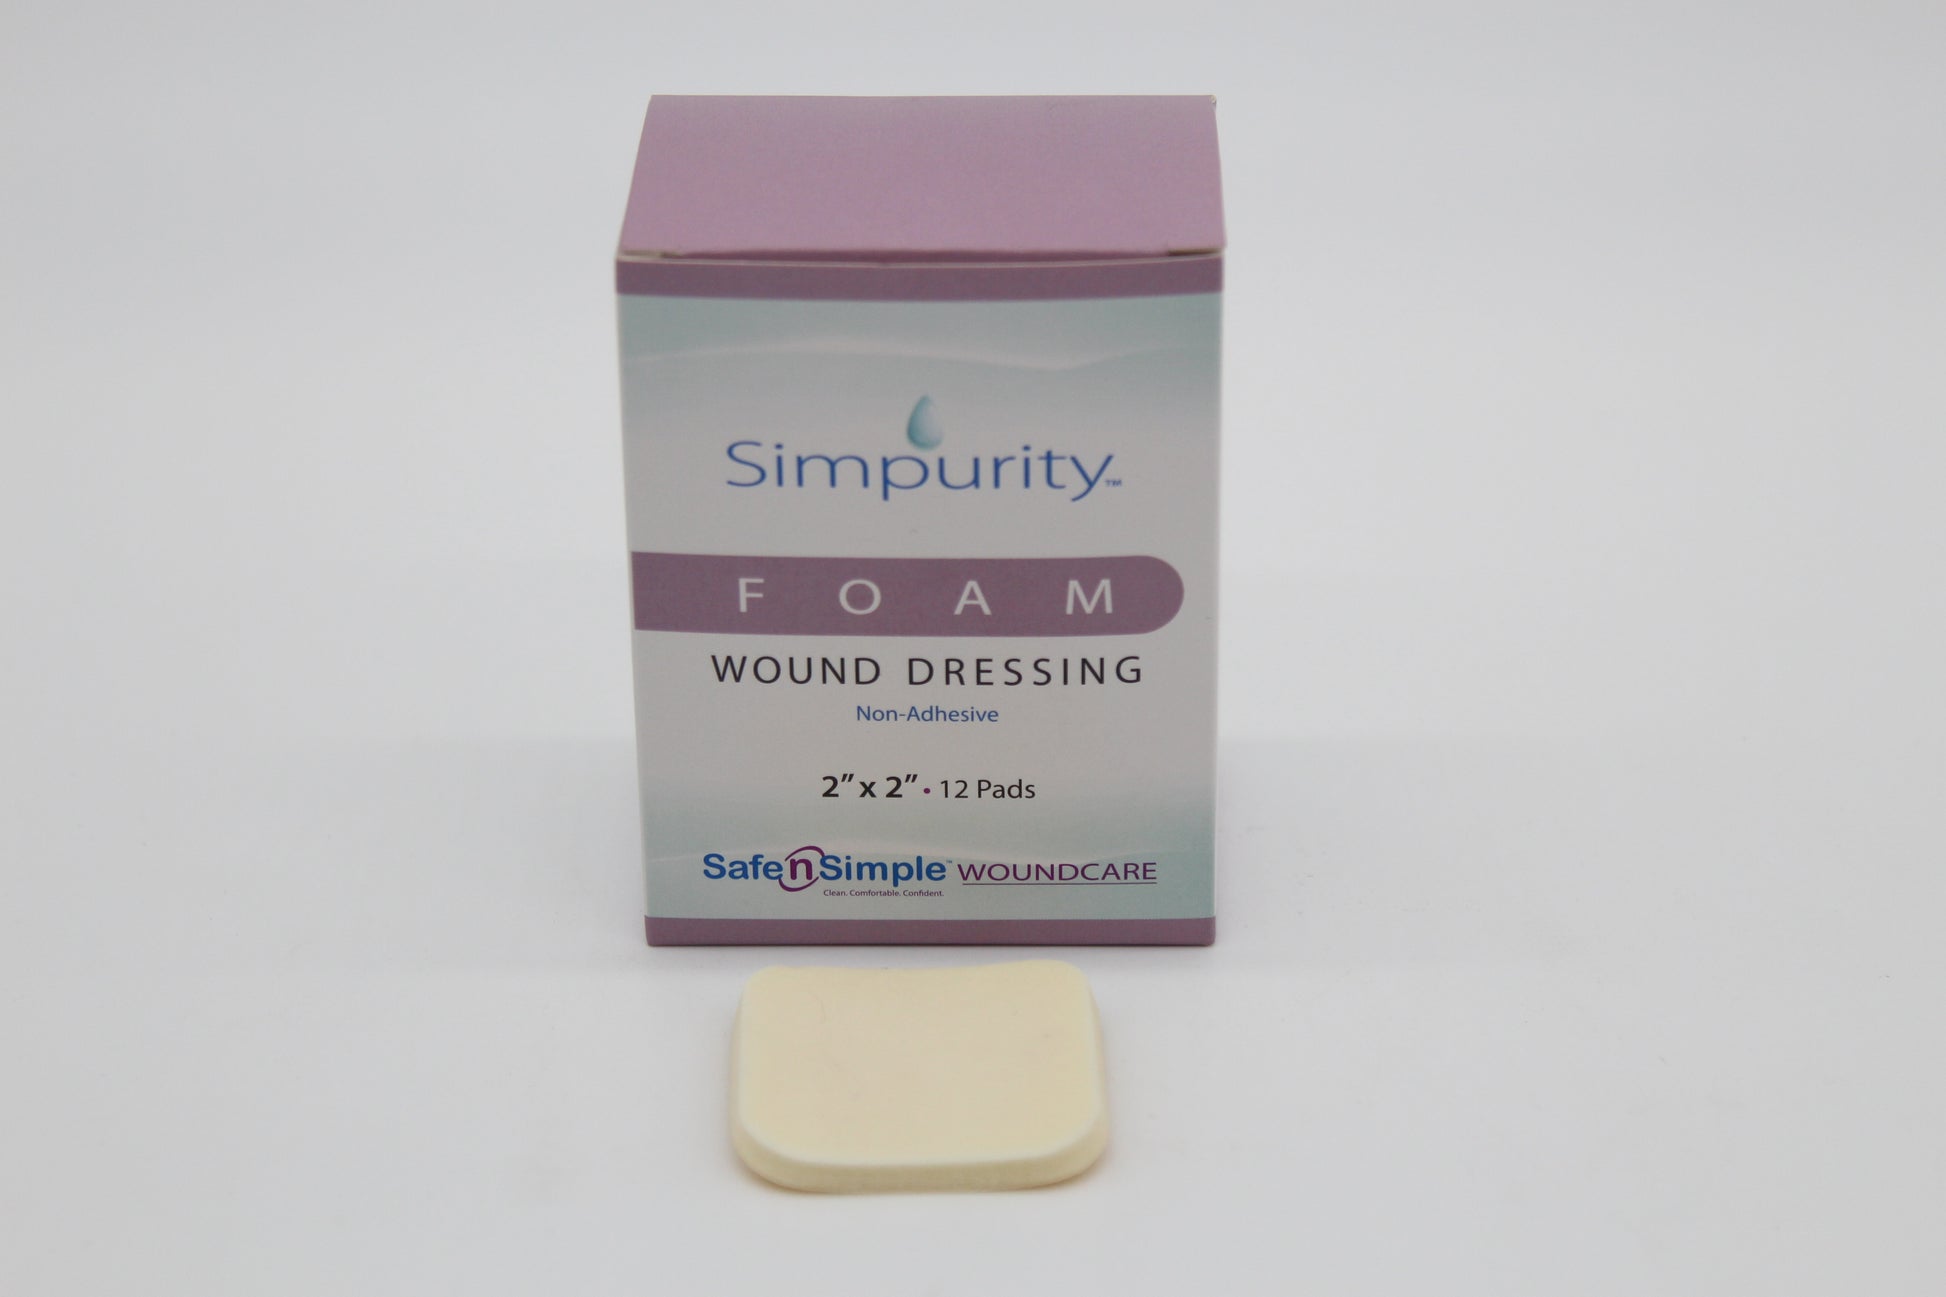 Foam - Non Adhesive Pads | Medical products | New medical products | Wound care dressing